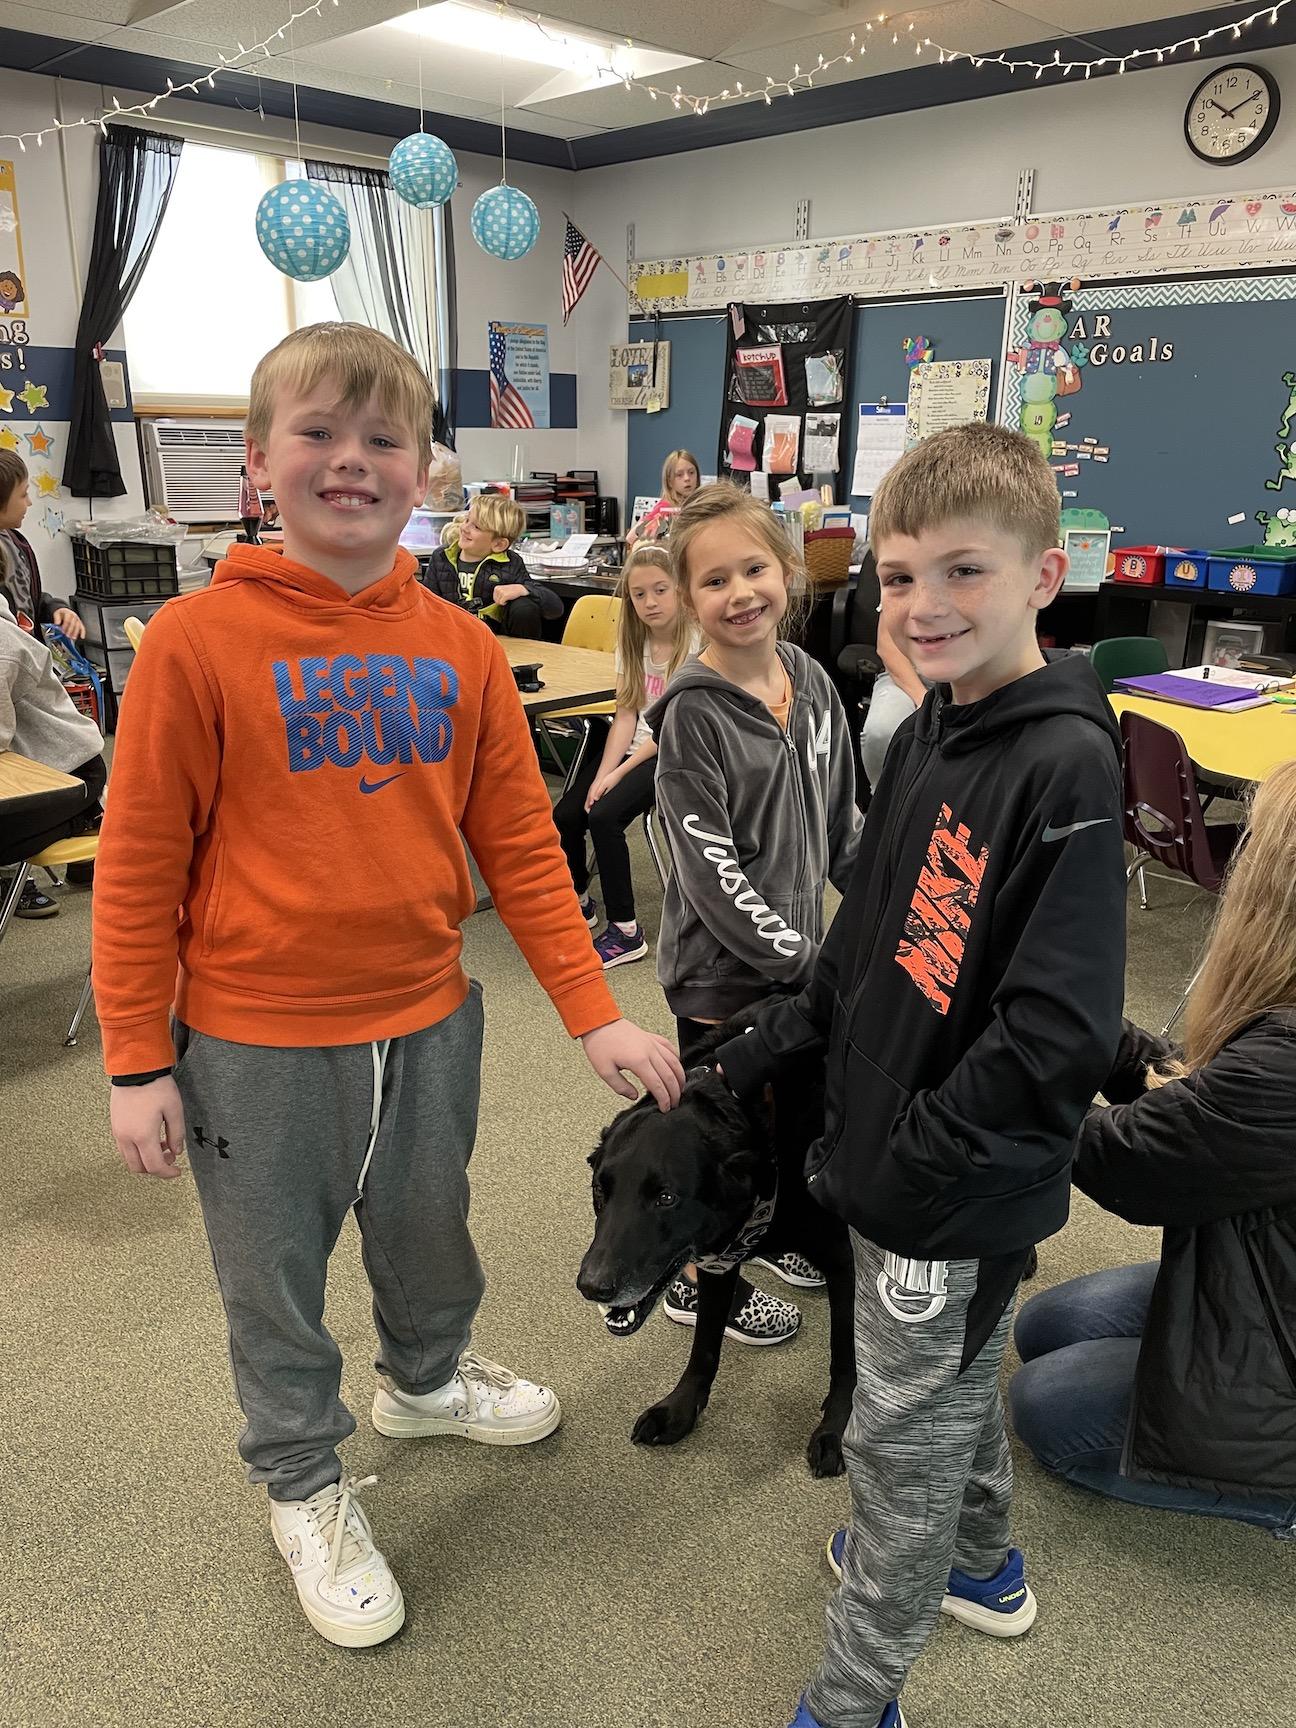 2nd-graders Matthew Evangeliste, Capriana Caruso, and Brody Fasso with Radar 